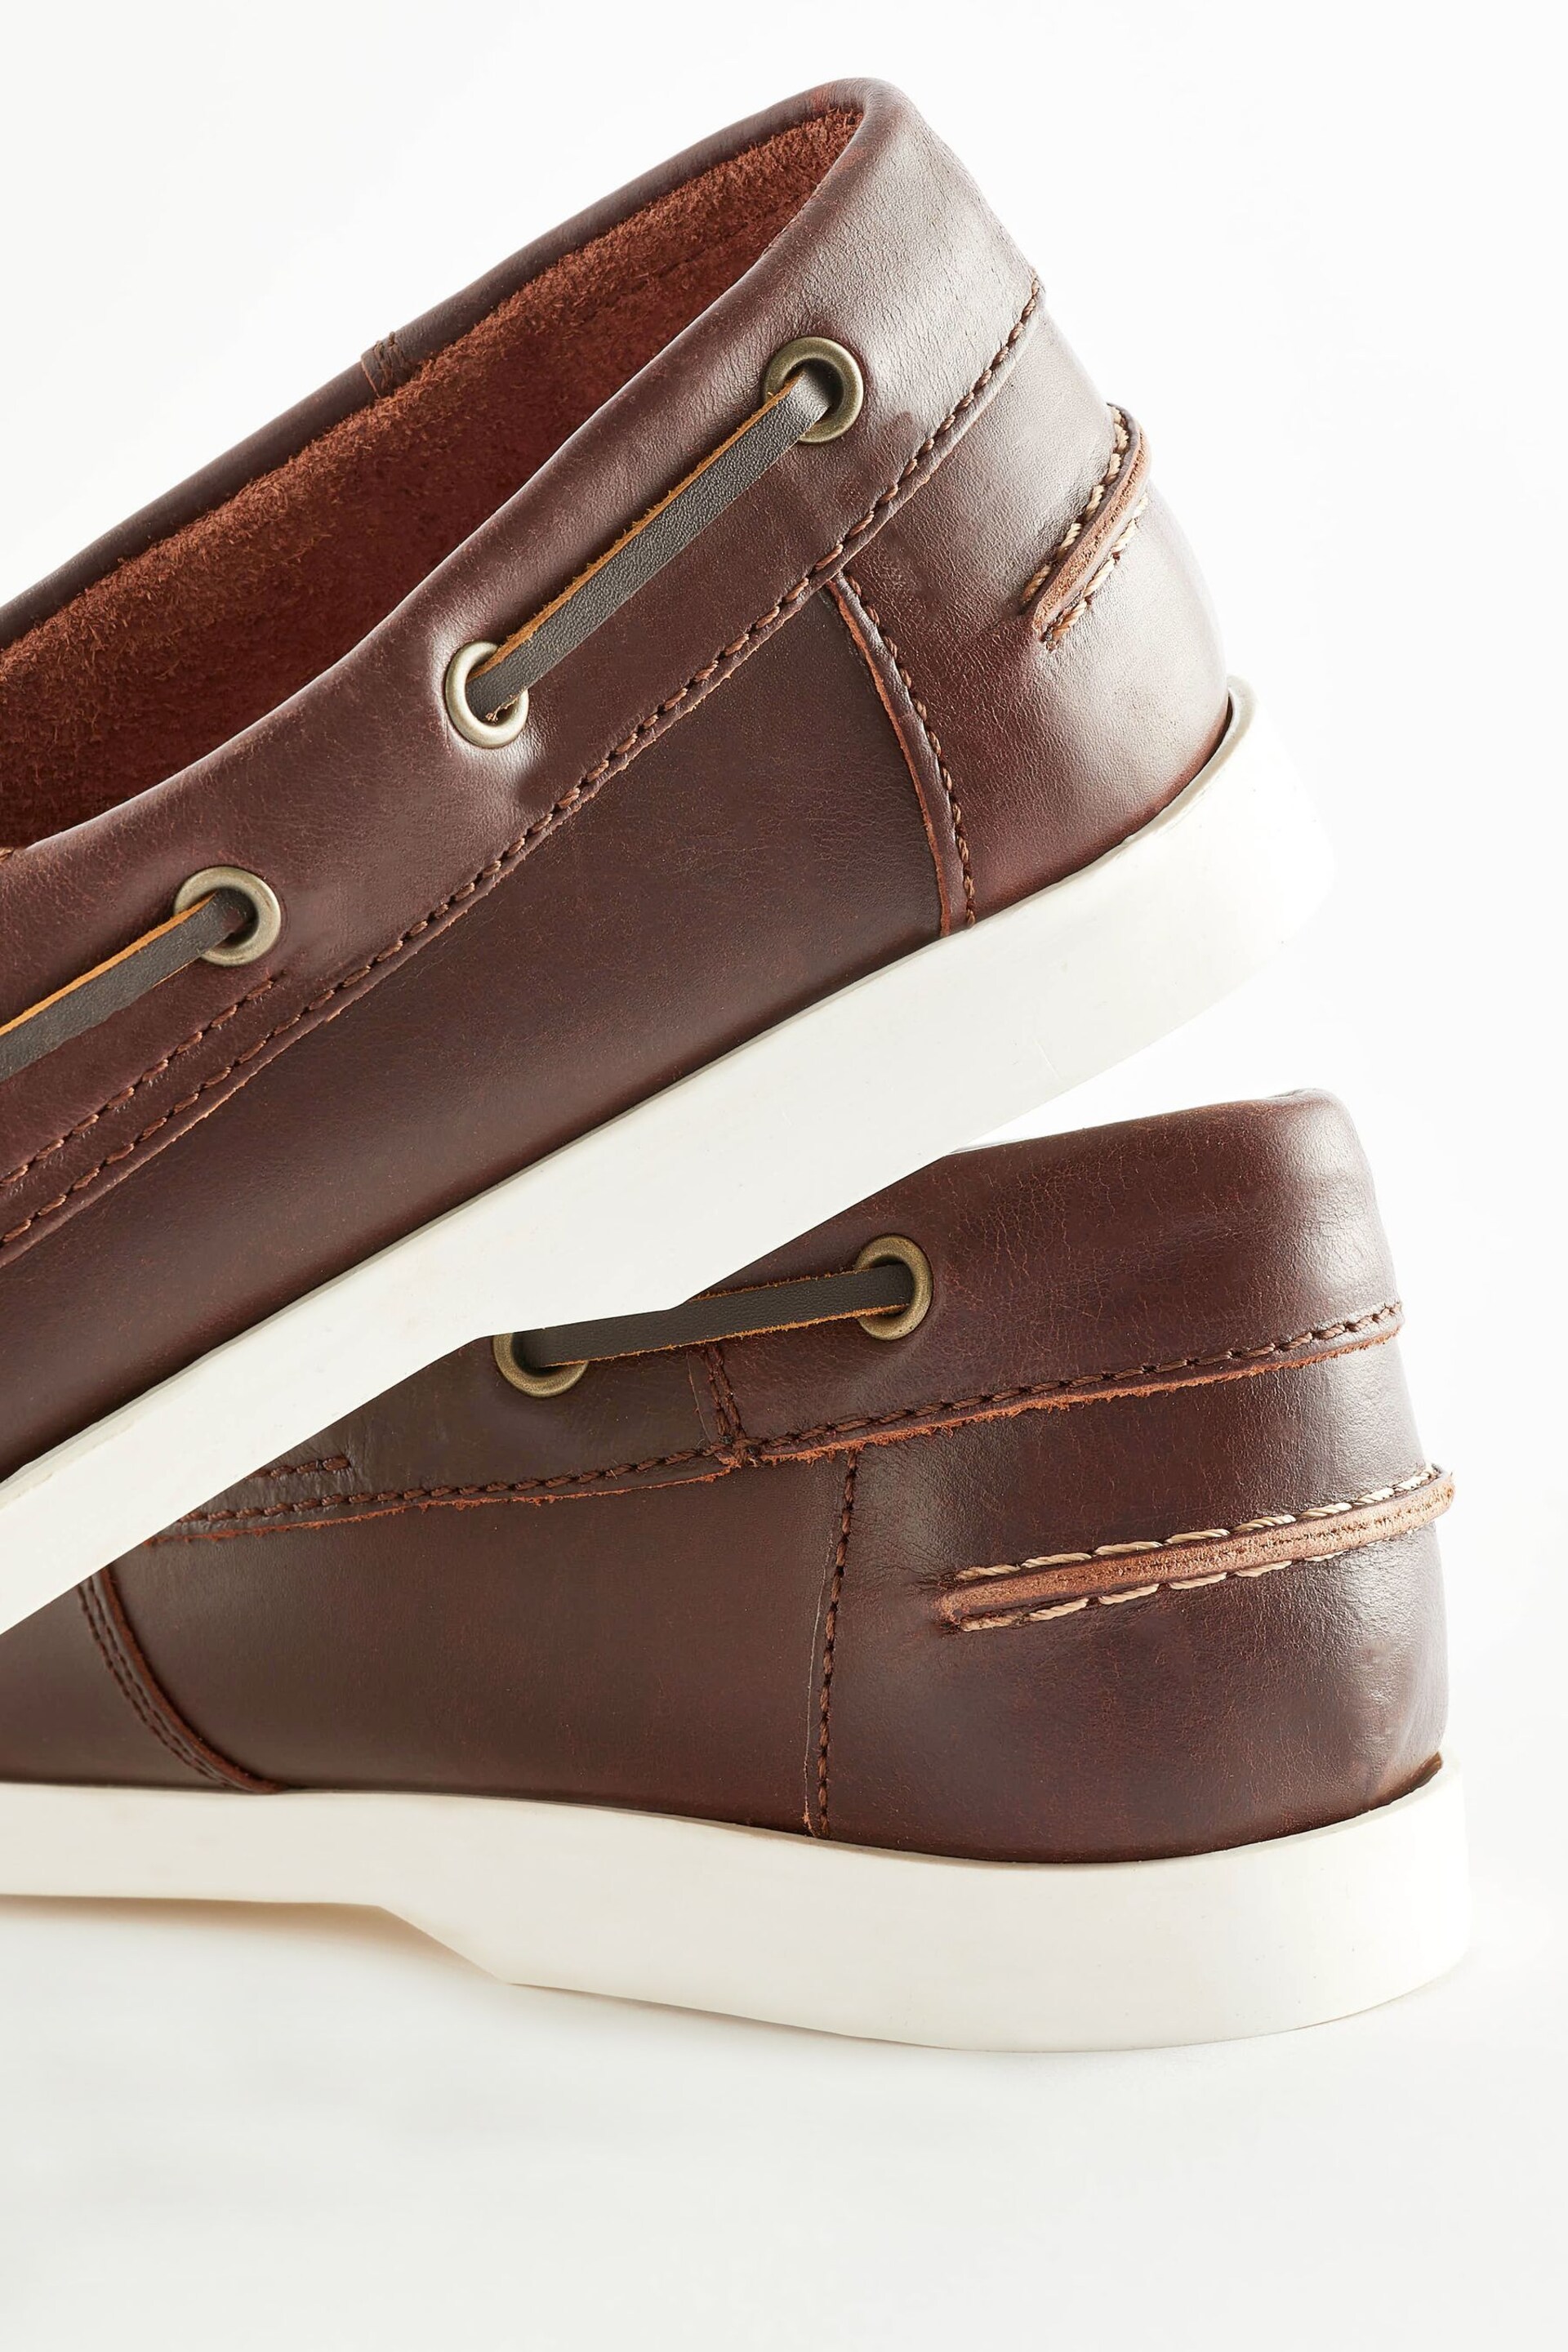 Chestnut Brown Classic Leather Boat Shoes - Image 5 of 7